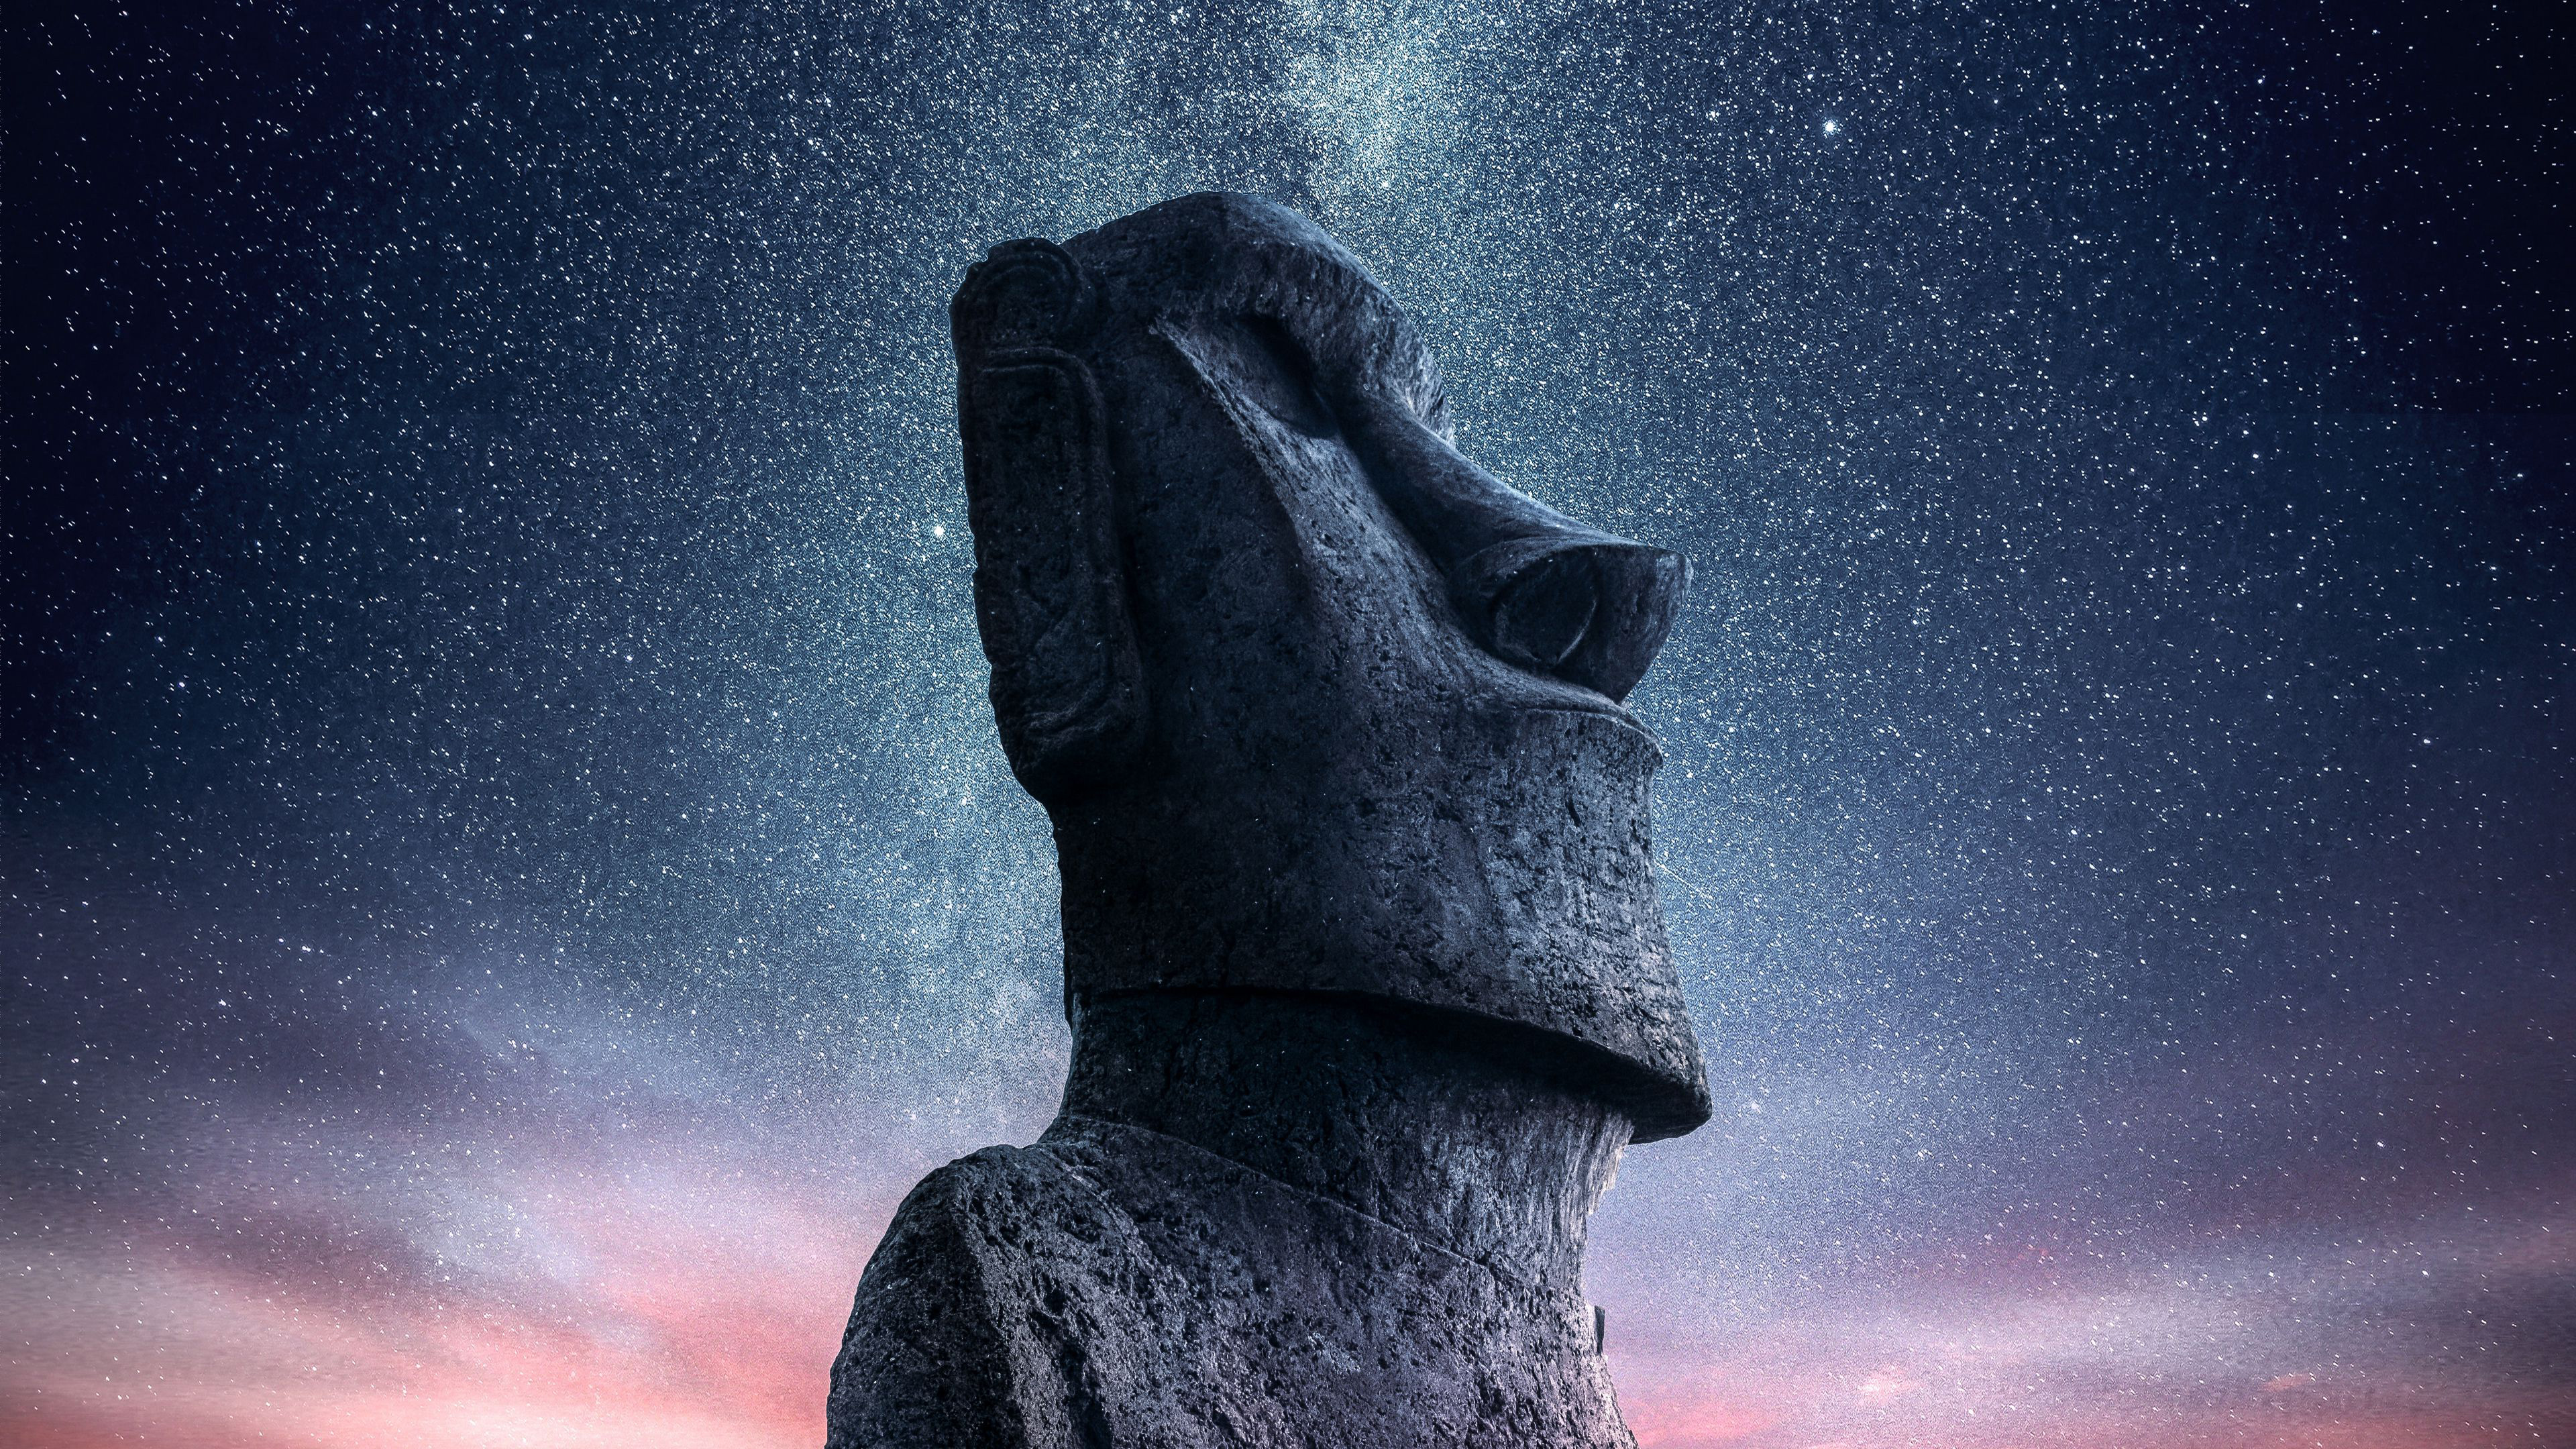 High Definition Moai Statues background